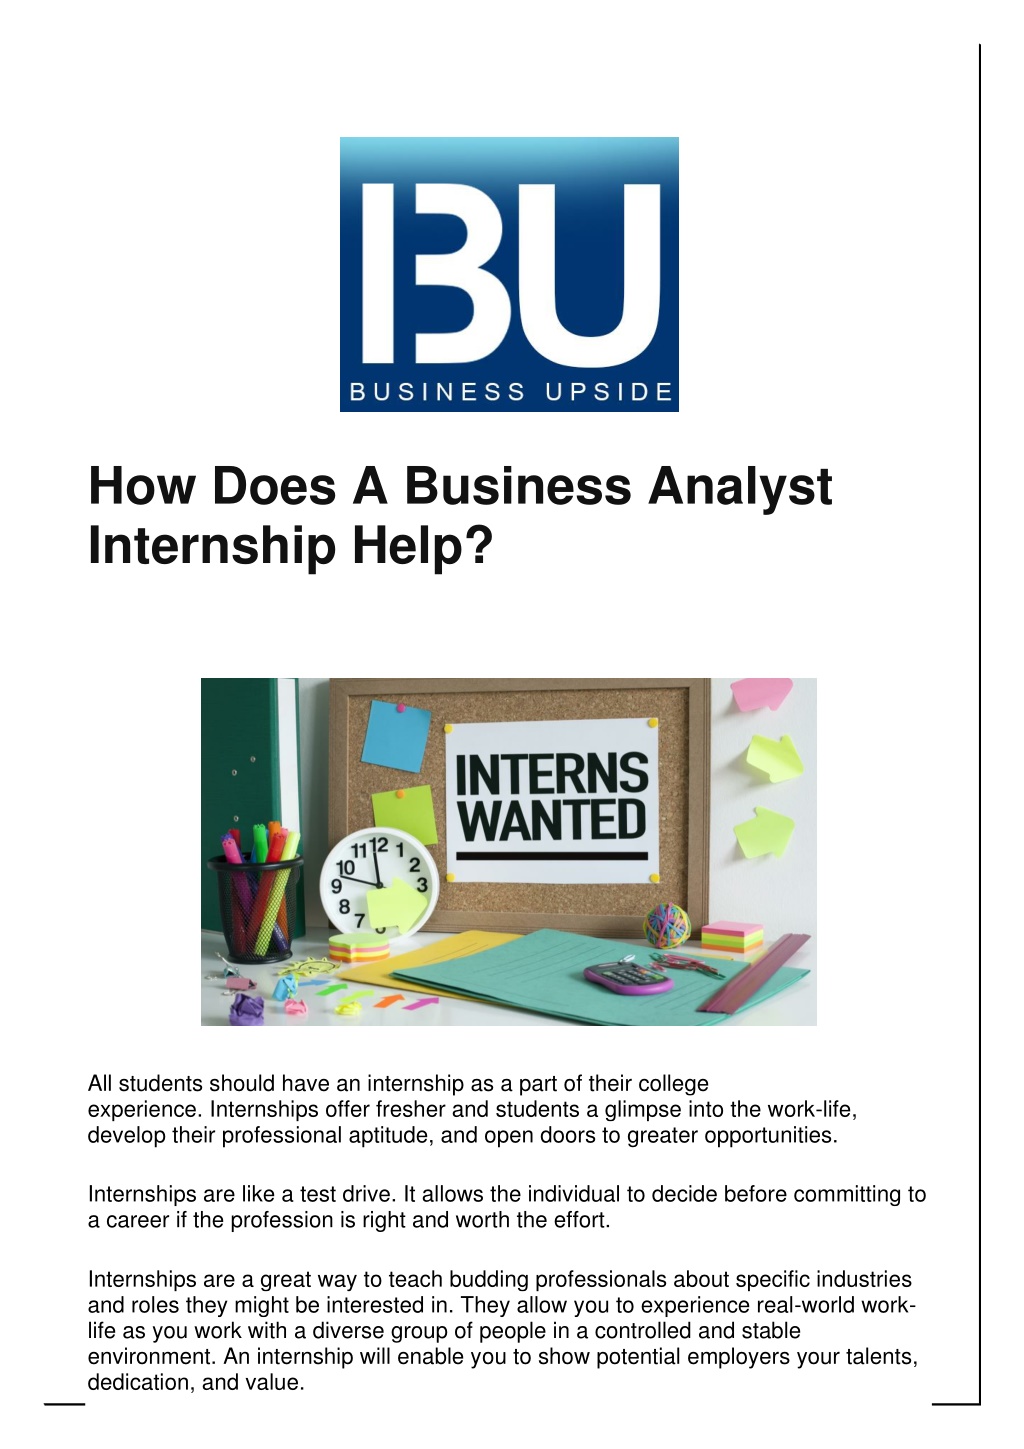 PPT How Does A Business Analyst Internship Help? PowerPoint